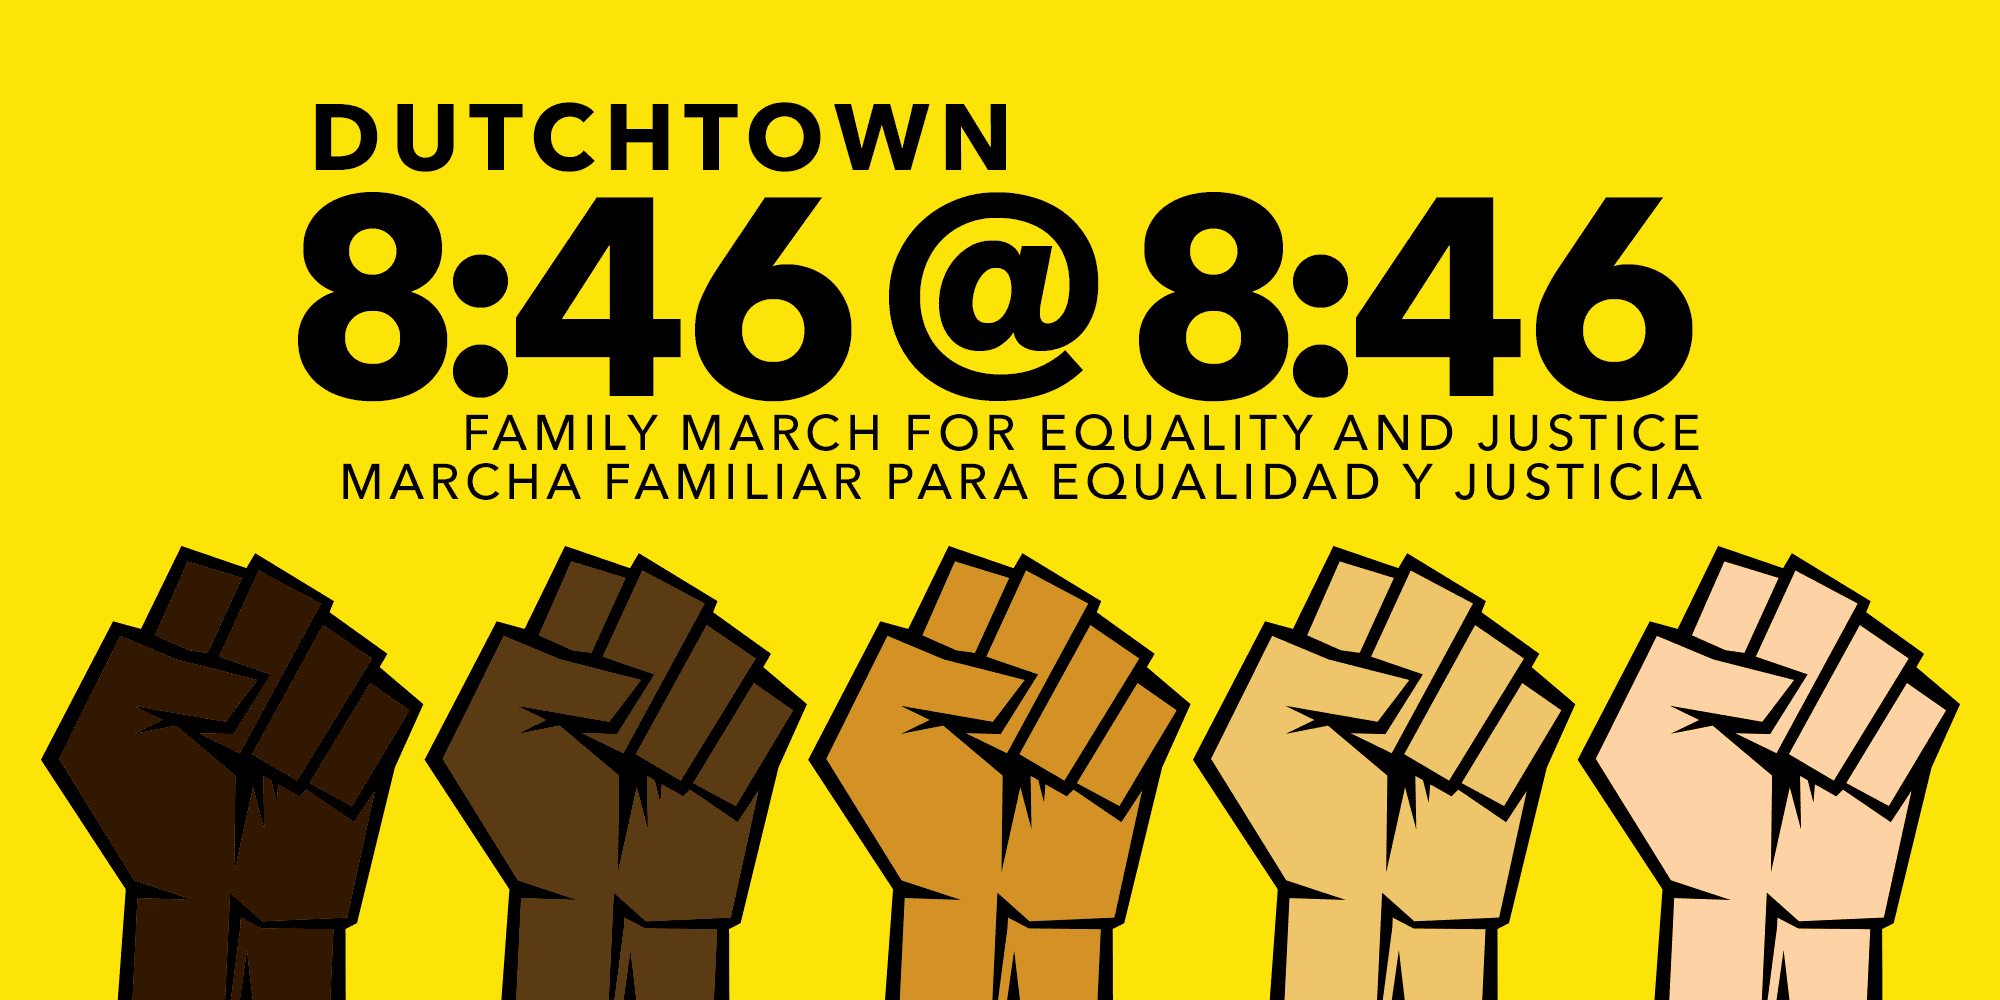 Dutchtown 8:46 @ 8:46: Family march for equality and justice/Marcha familiar para equalidad y justicia.